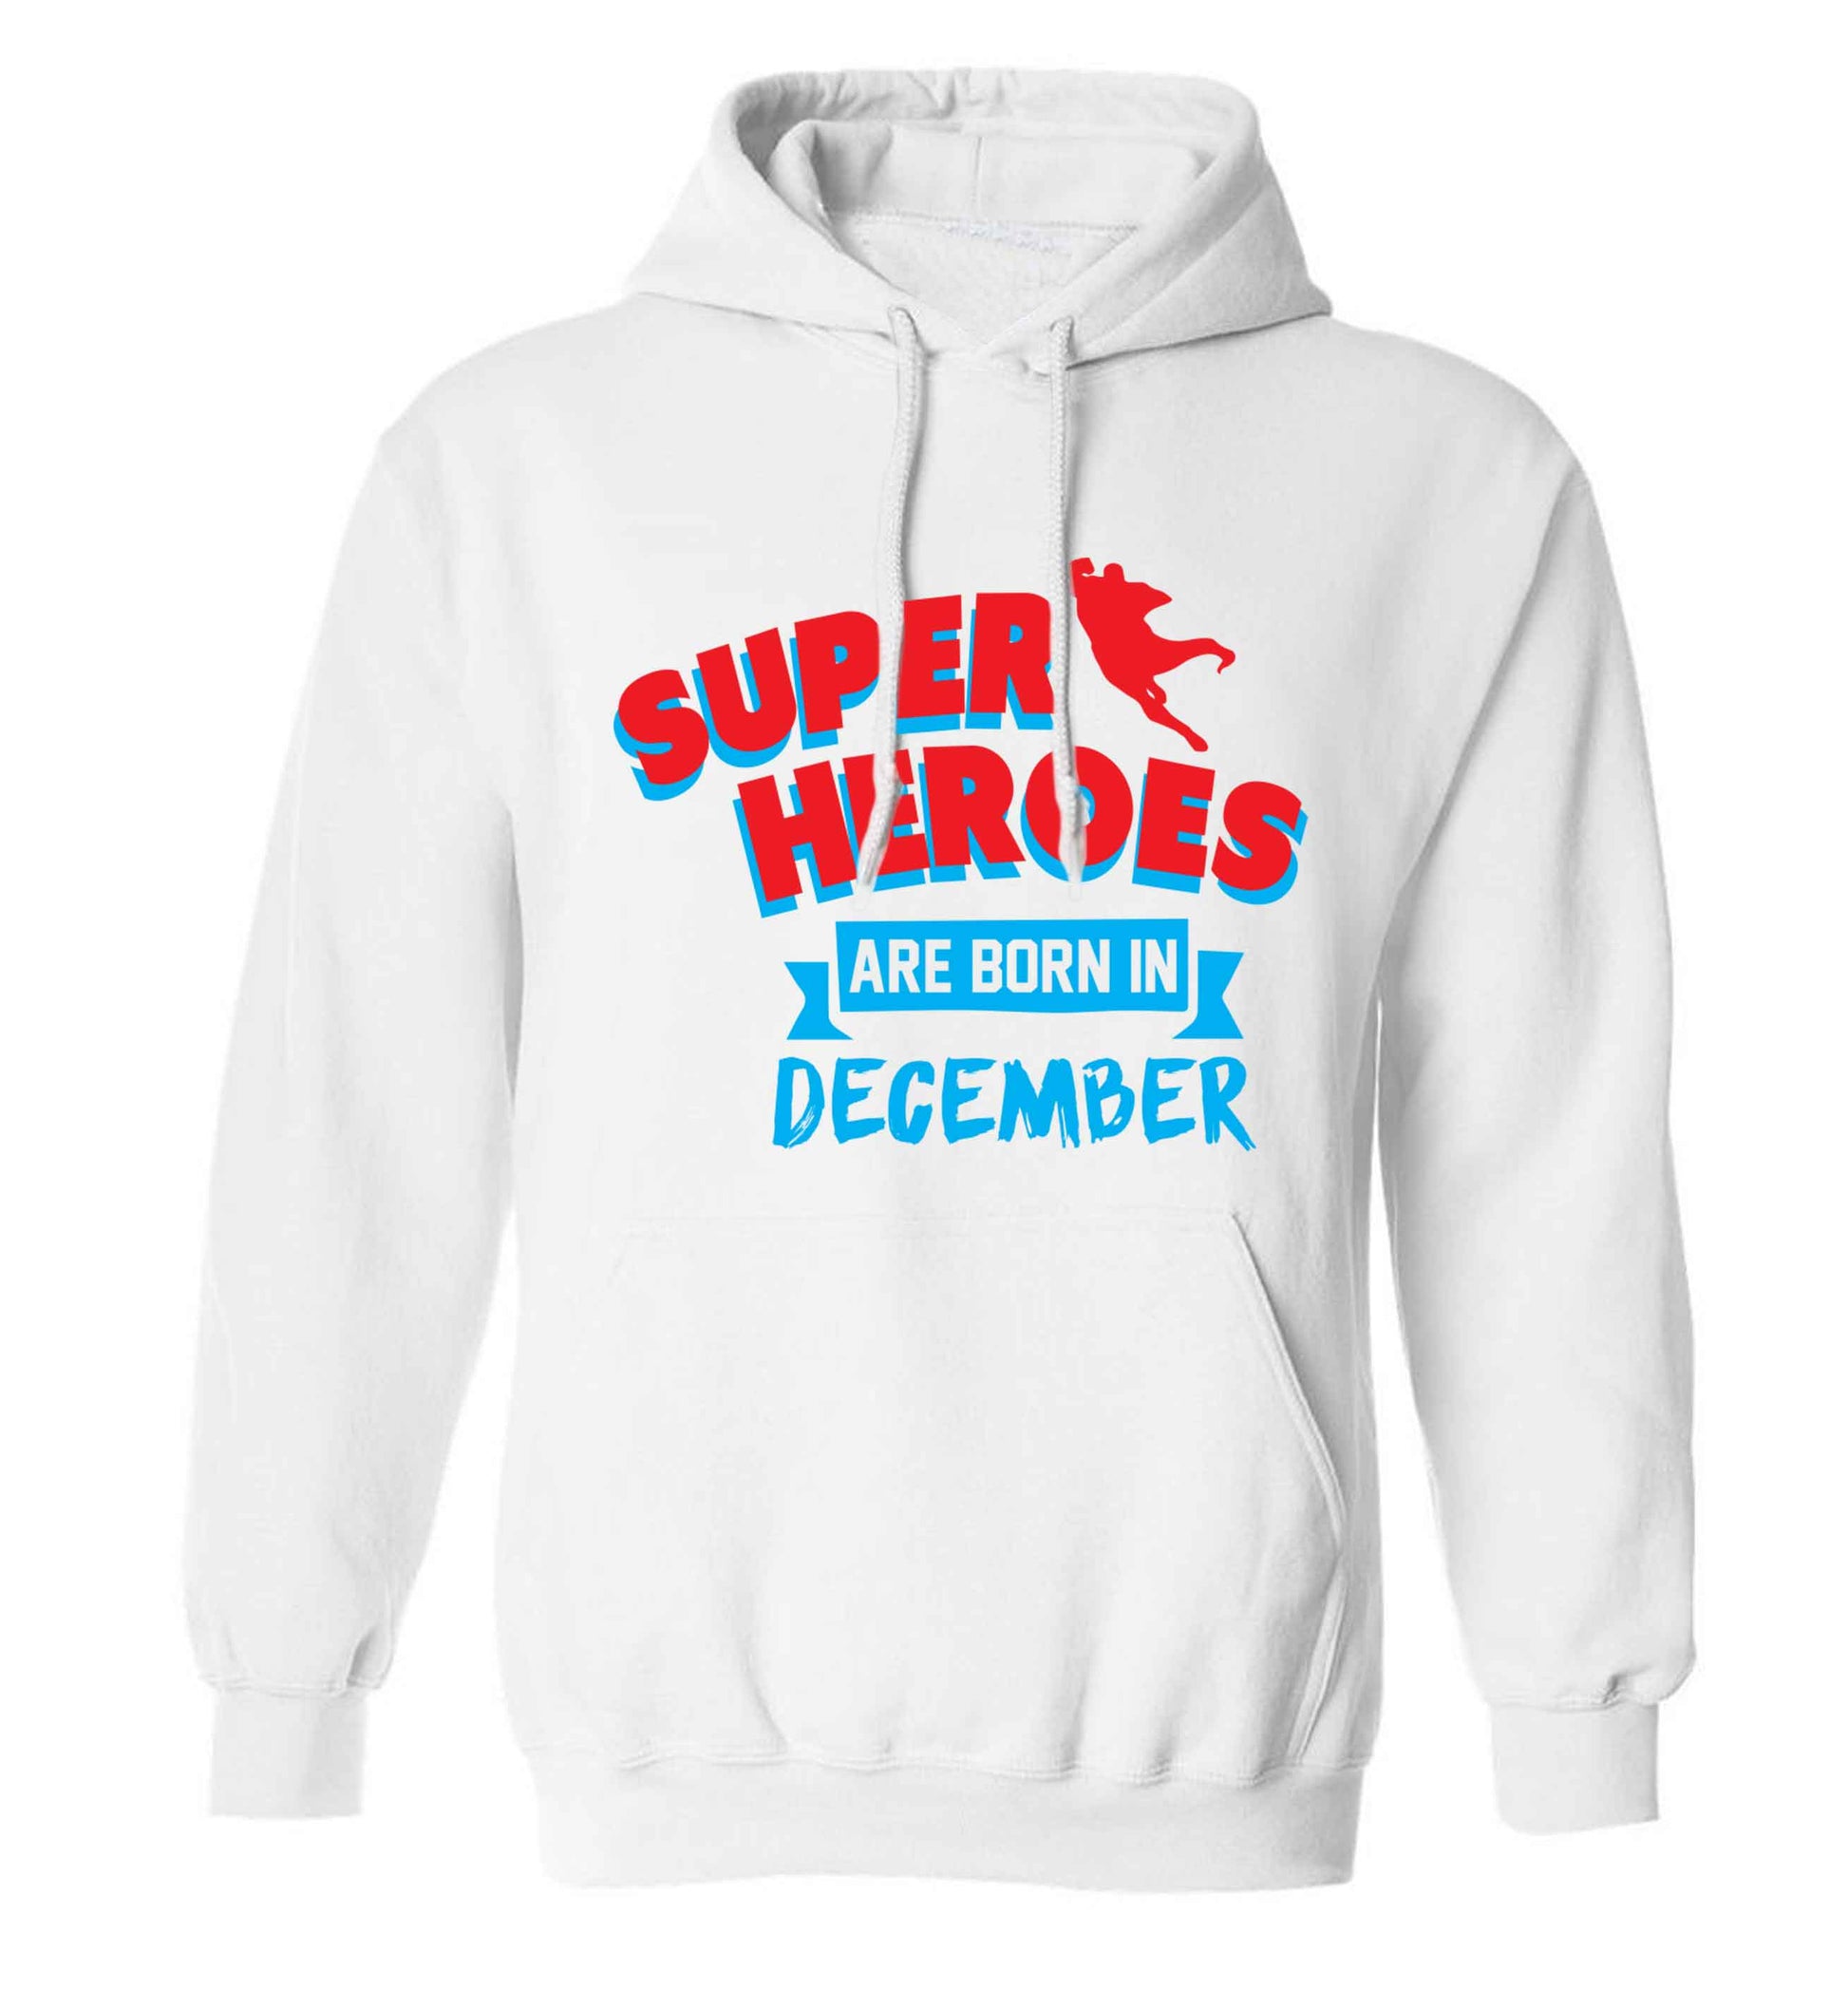 Superheroes are born in December adults unisex white hoodie 2XL